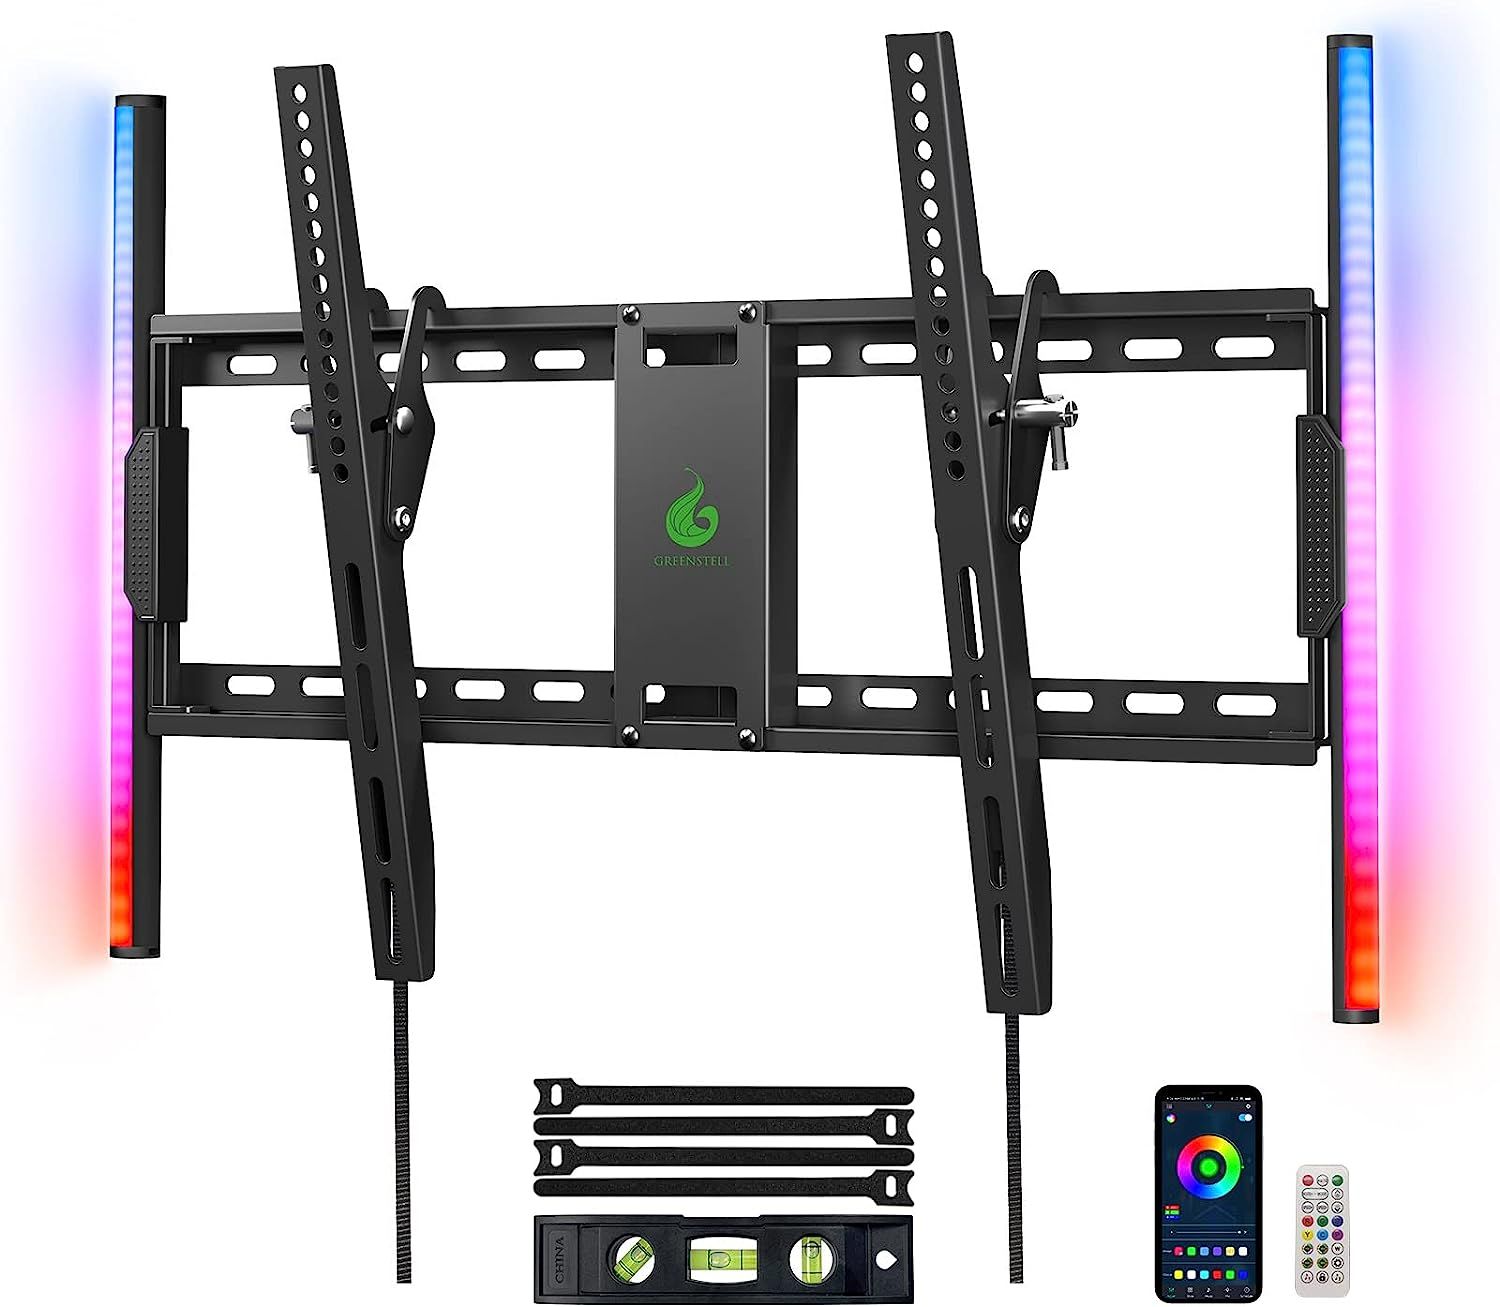 Greenstell TV Mount with LED Lights